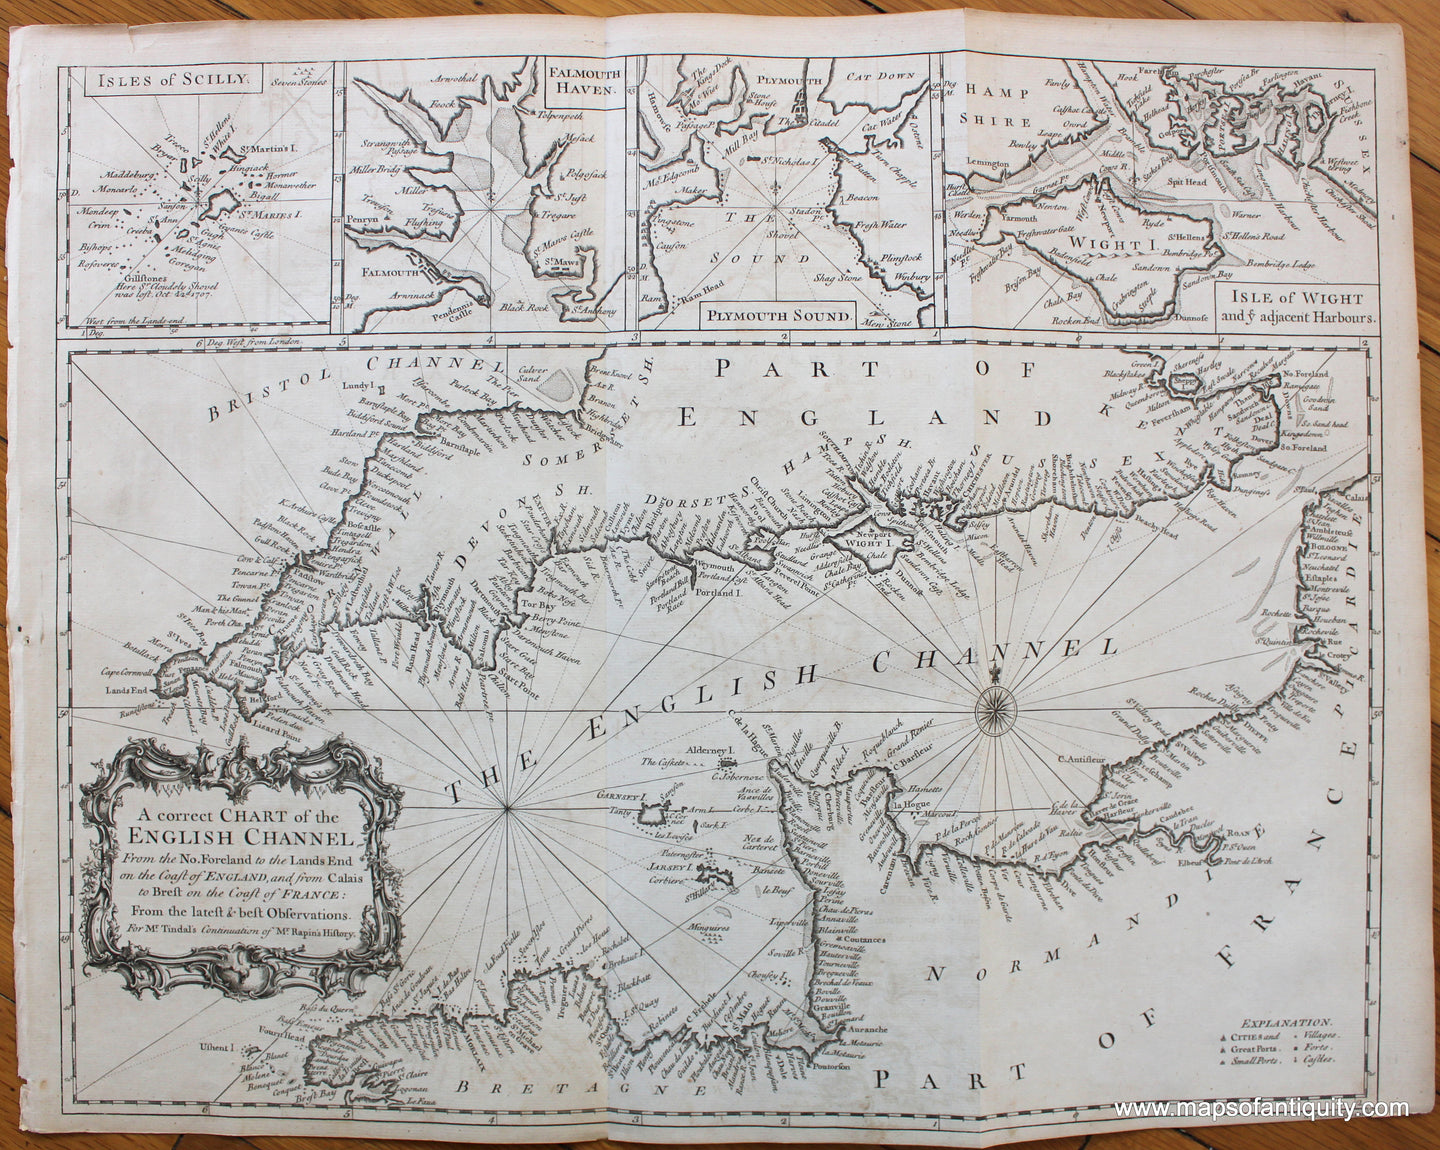 Antique-Map-Chart-English-Channel-Seale-Rapin-Tindal-1745-1740s-1700s-18th-century